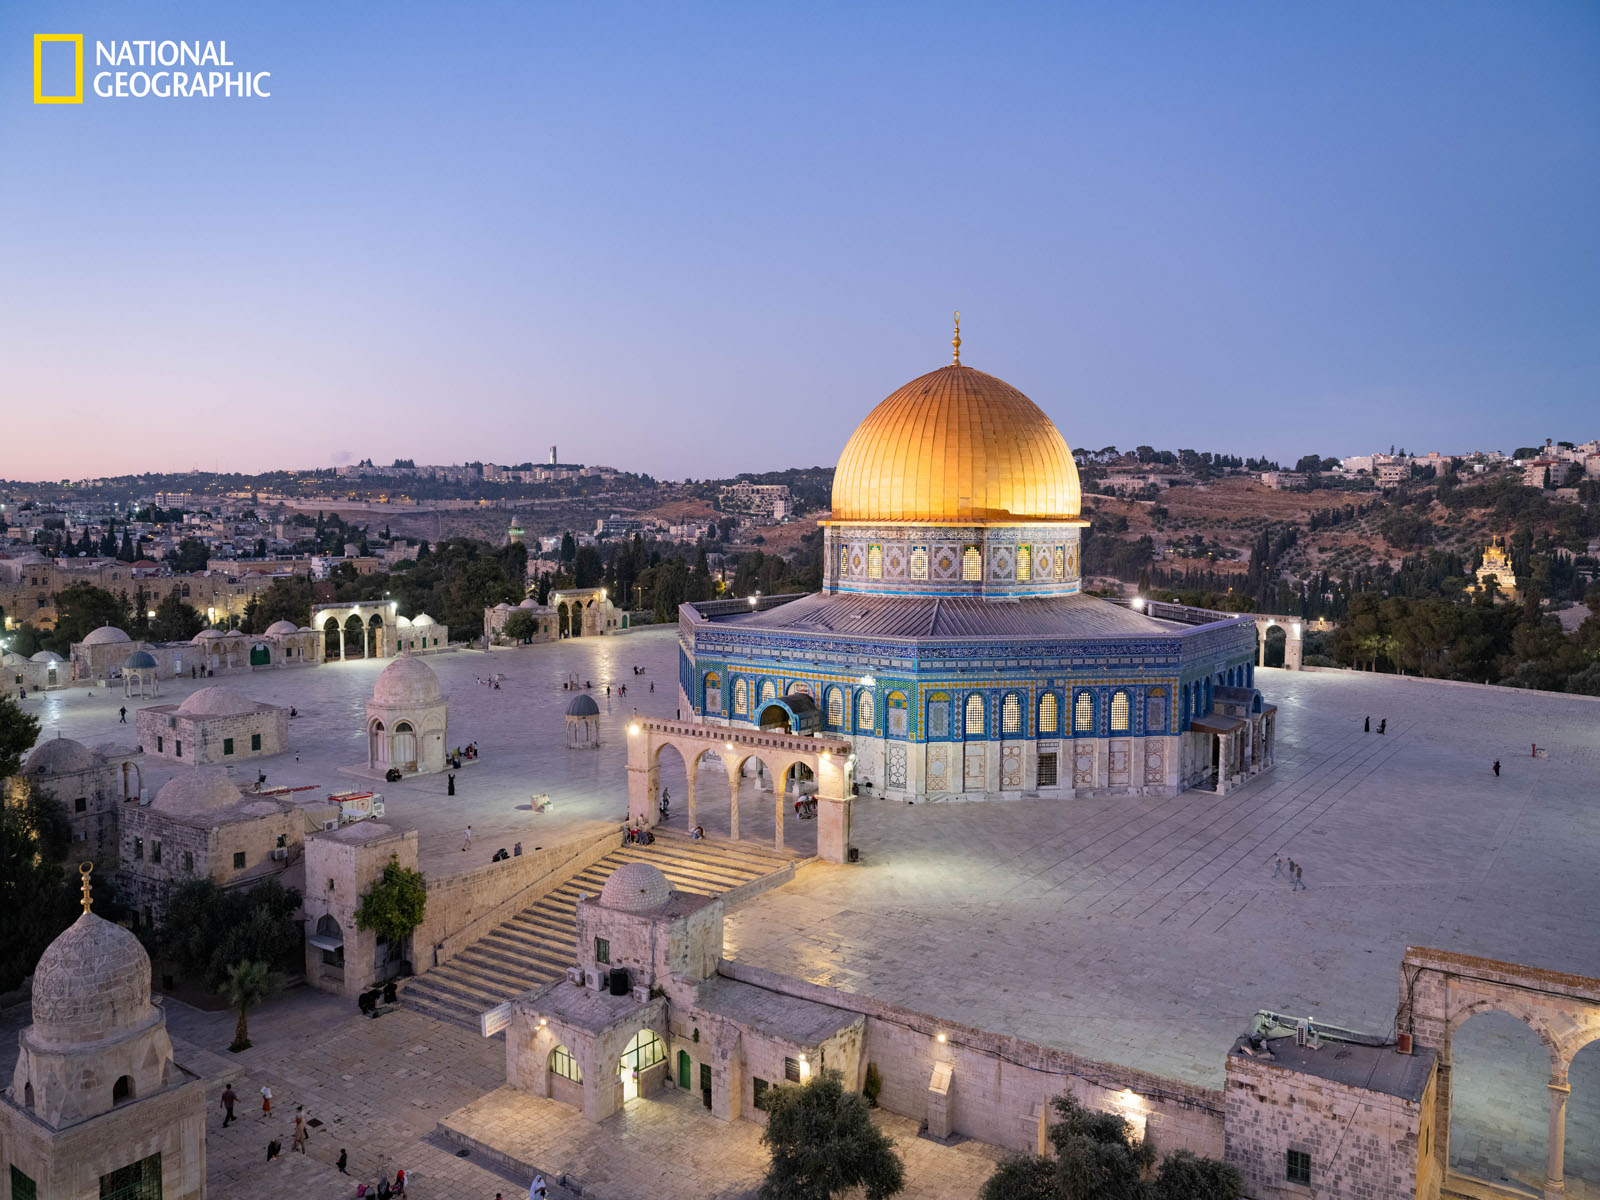 National Geographic Dome of the Rock